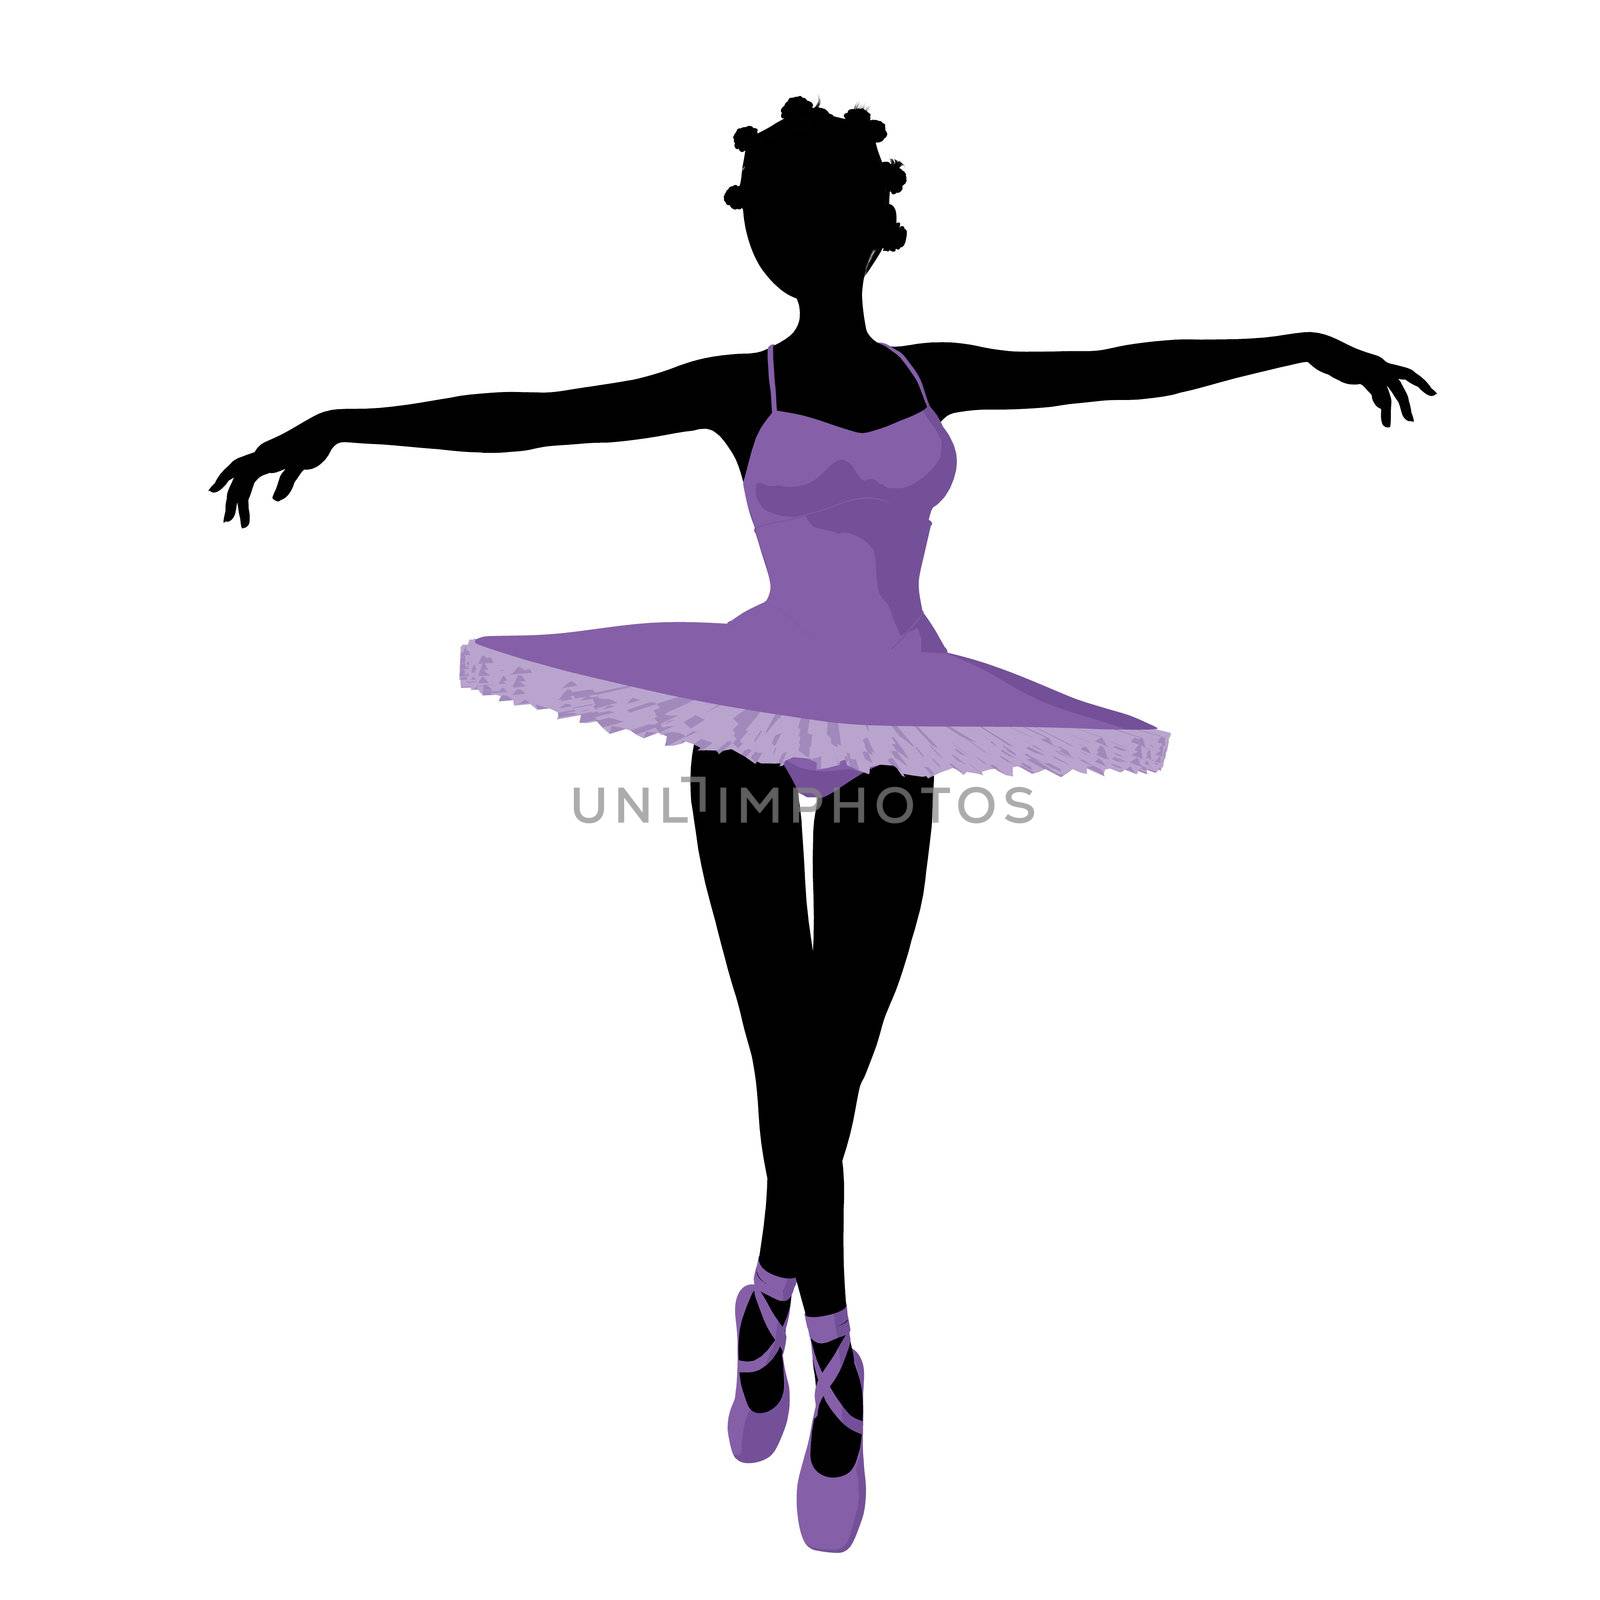 African American Ballerina Illustration Silhouette by kathygold